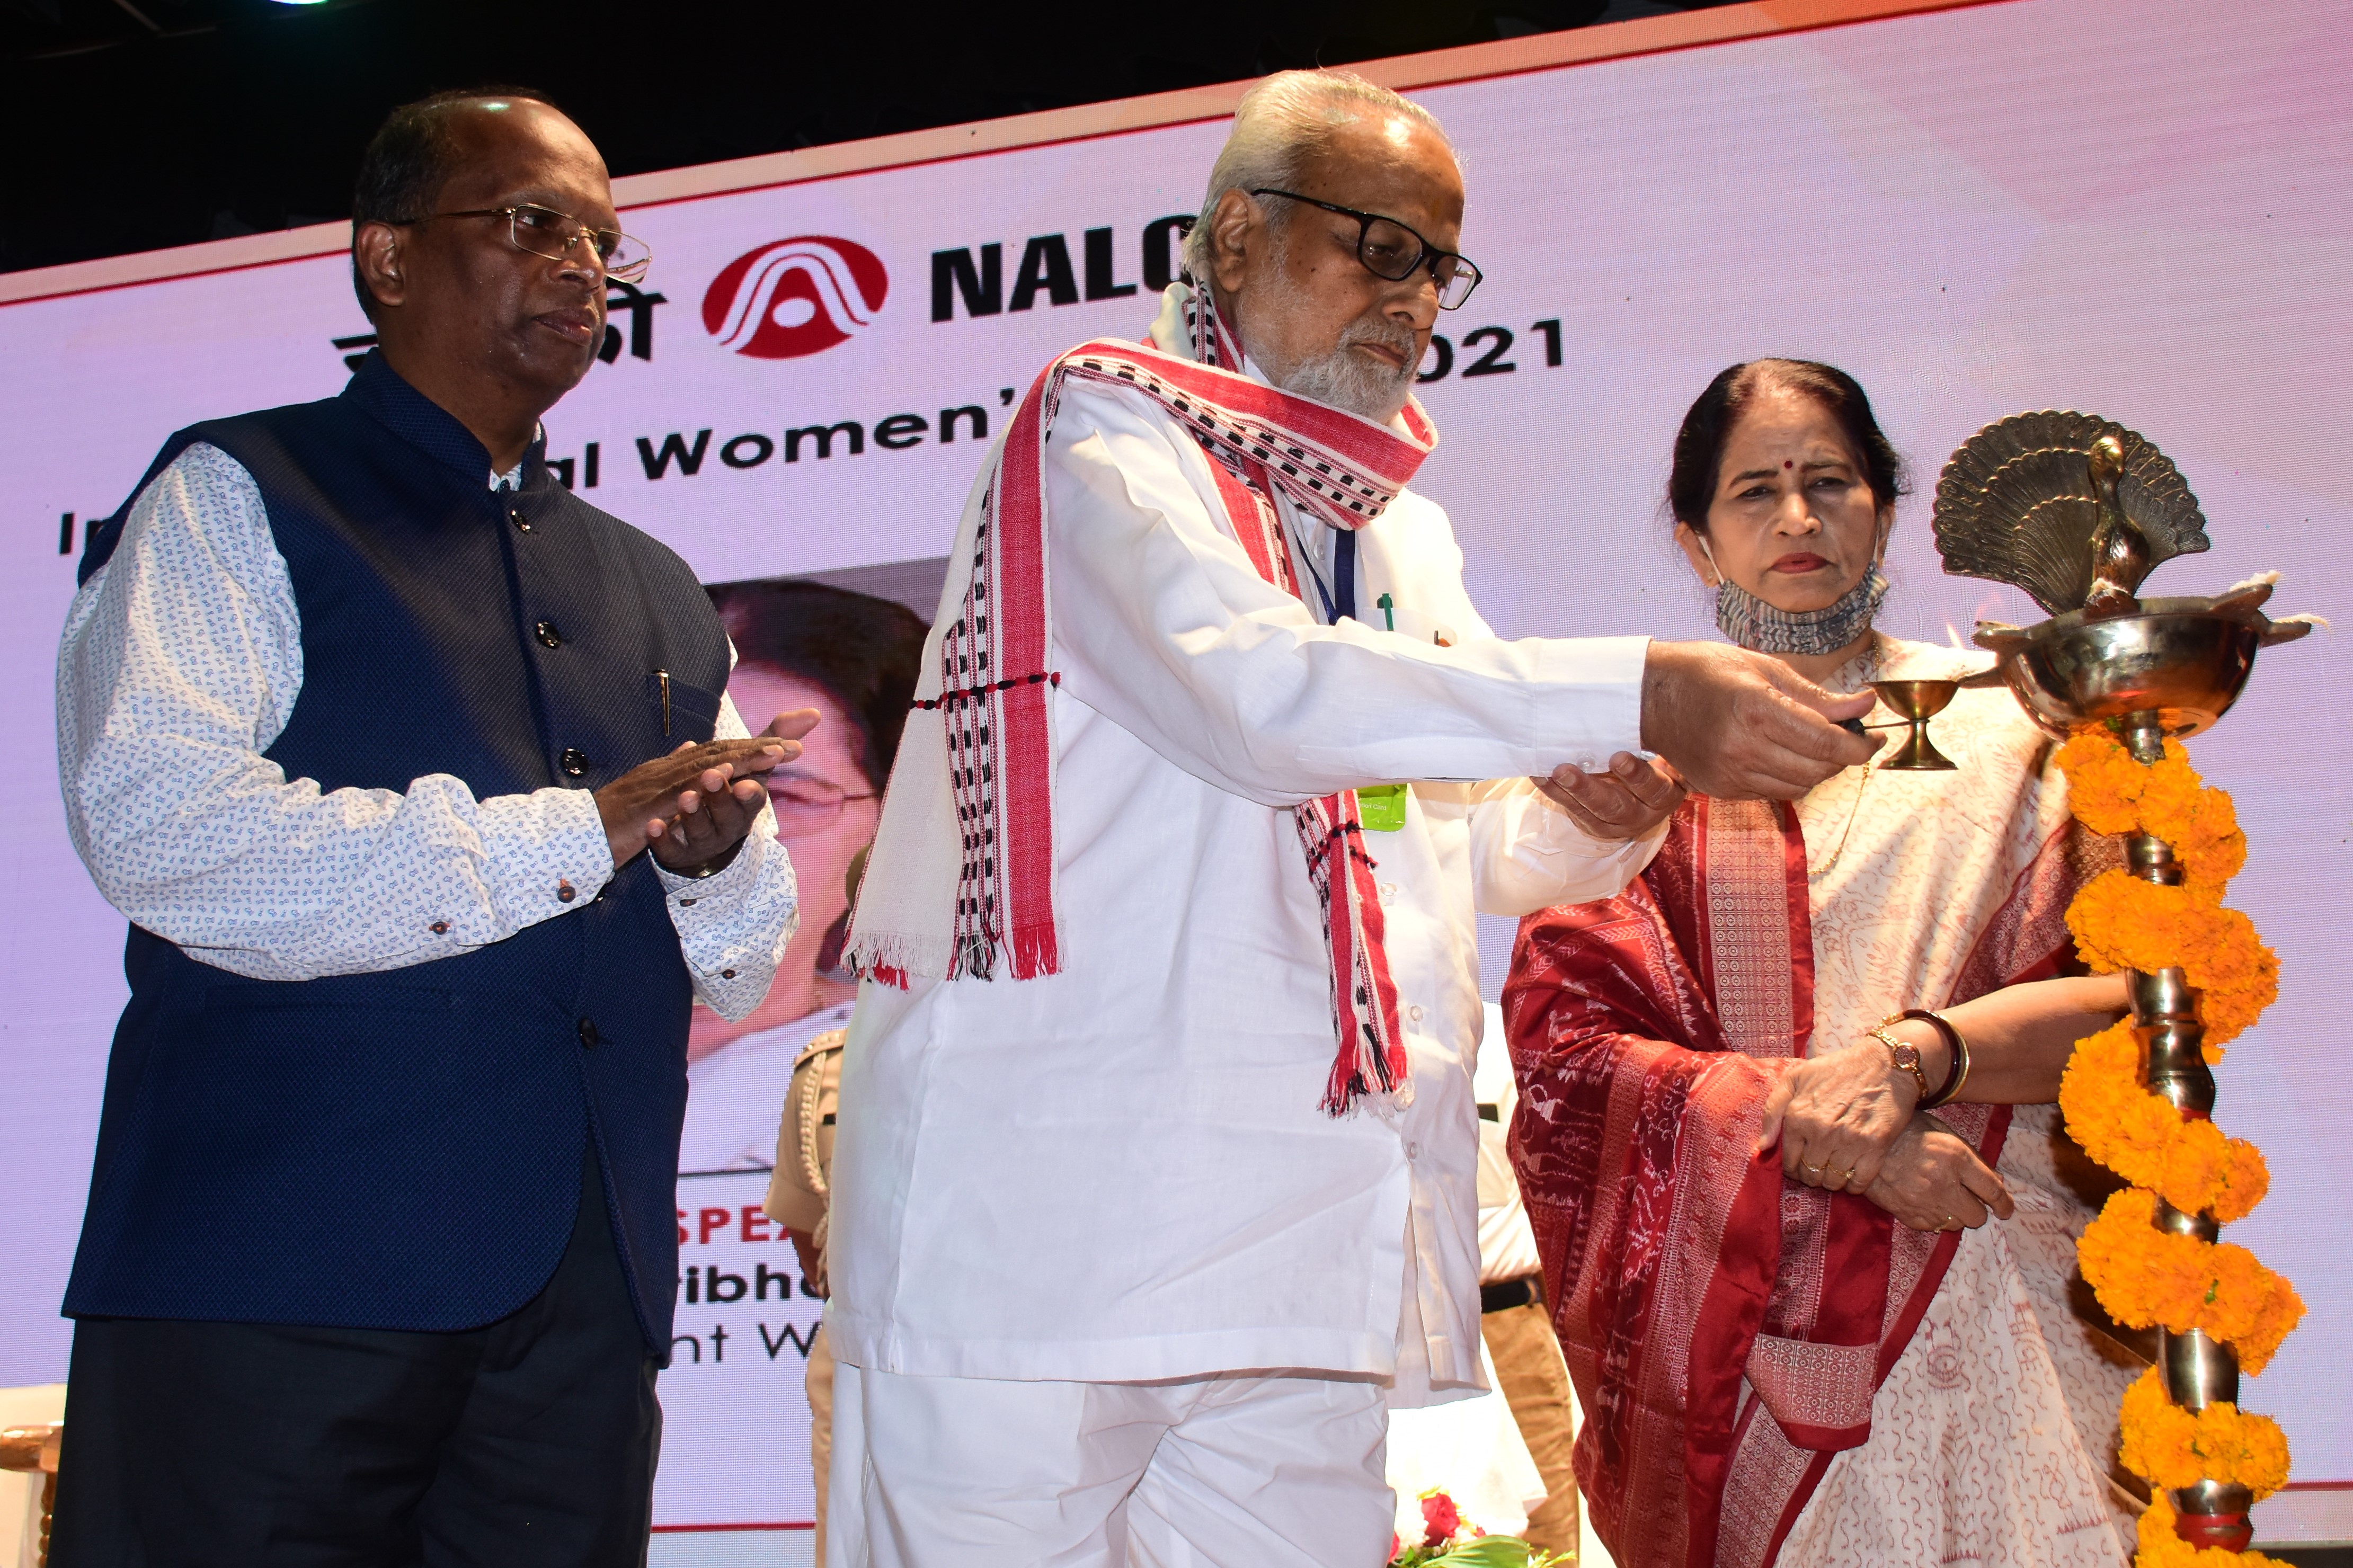 Hon’ble  Governor Prof. Ganeshi Lal with Padmashree Pratibha  Ray and CMD ,NALCO Sridhar Patra in International Women’s Day Celebrations organized by NALCO  in NALCO Research and Training Centre Bhubaneswar on 08.03.2021.